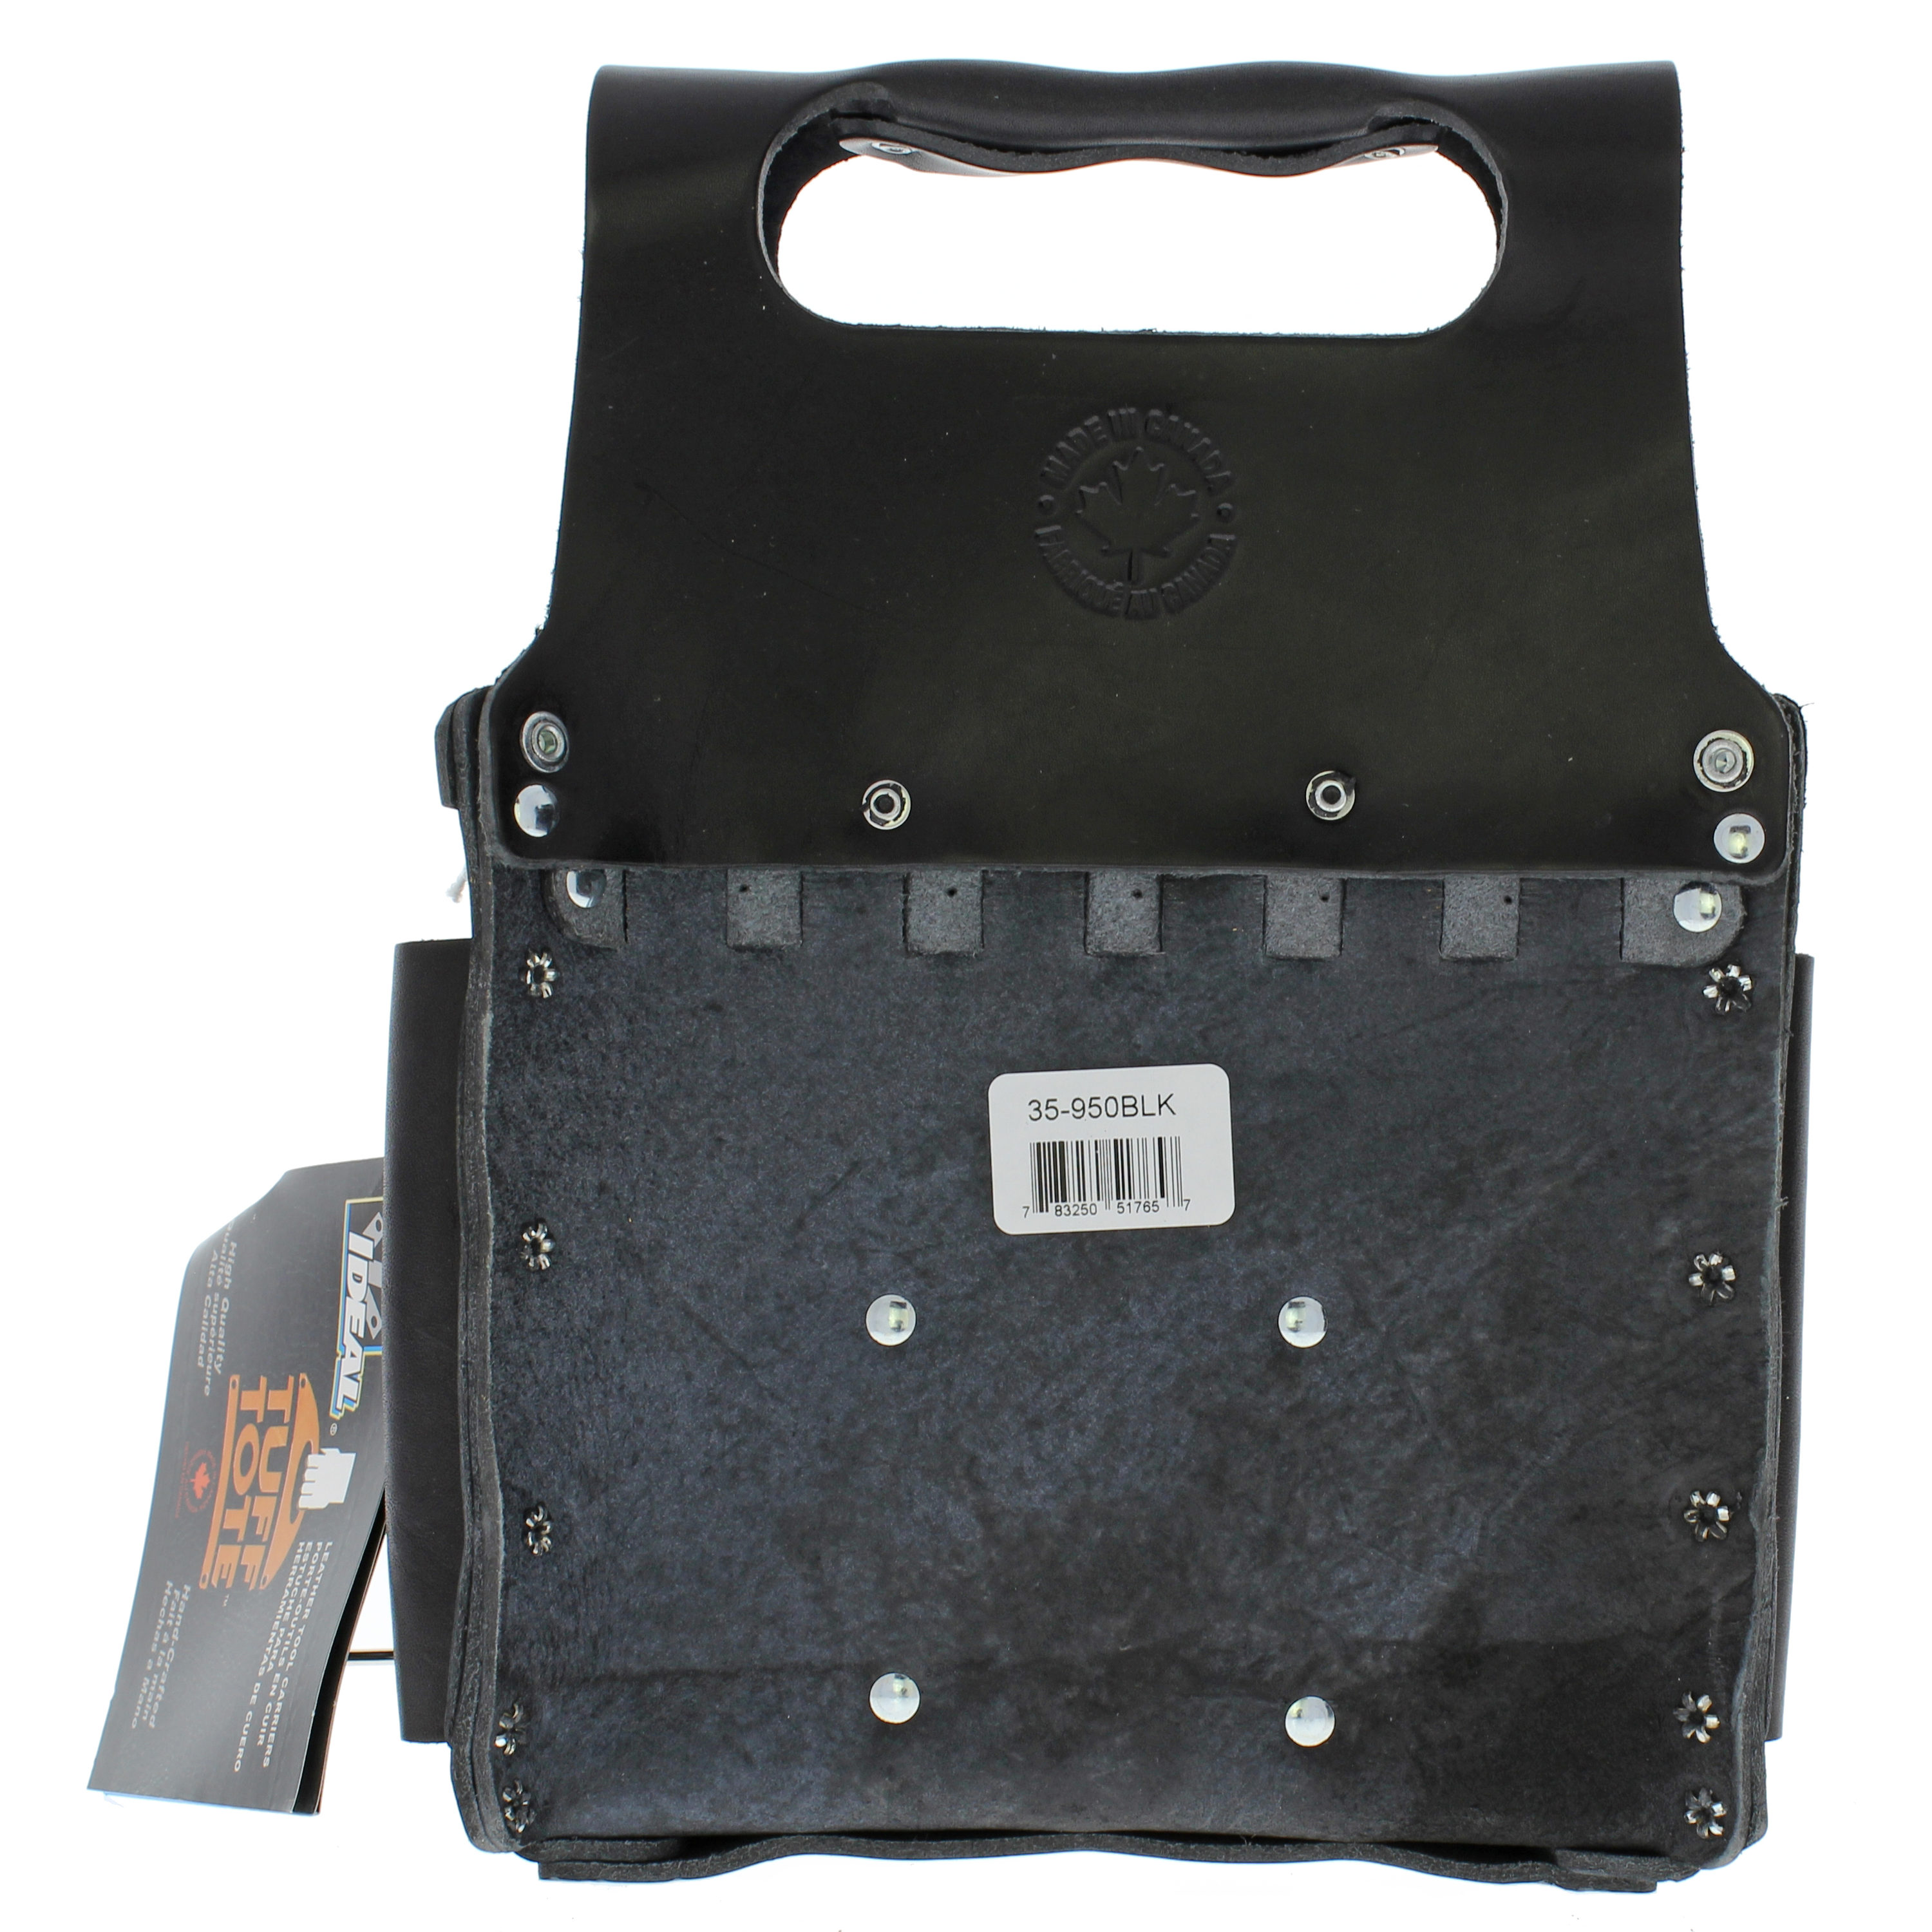 Ideal Tuff-Tote Standard Leather Tool Pouch with Strap (35-311)